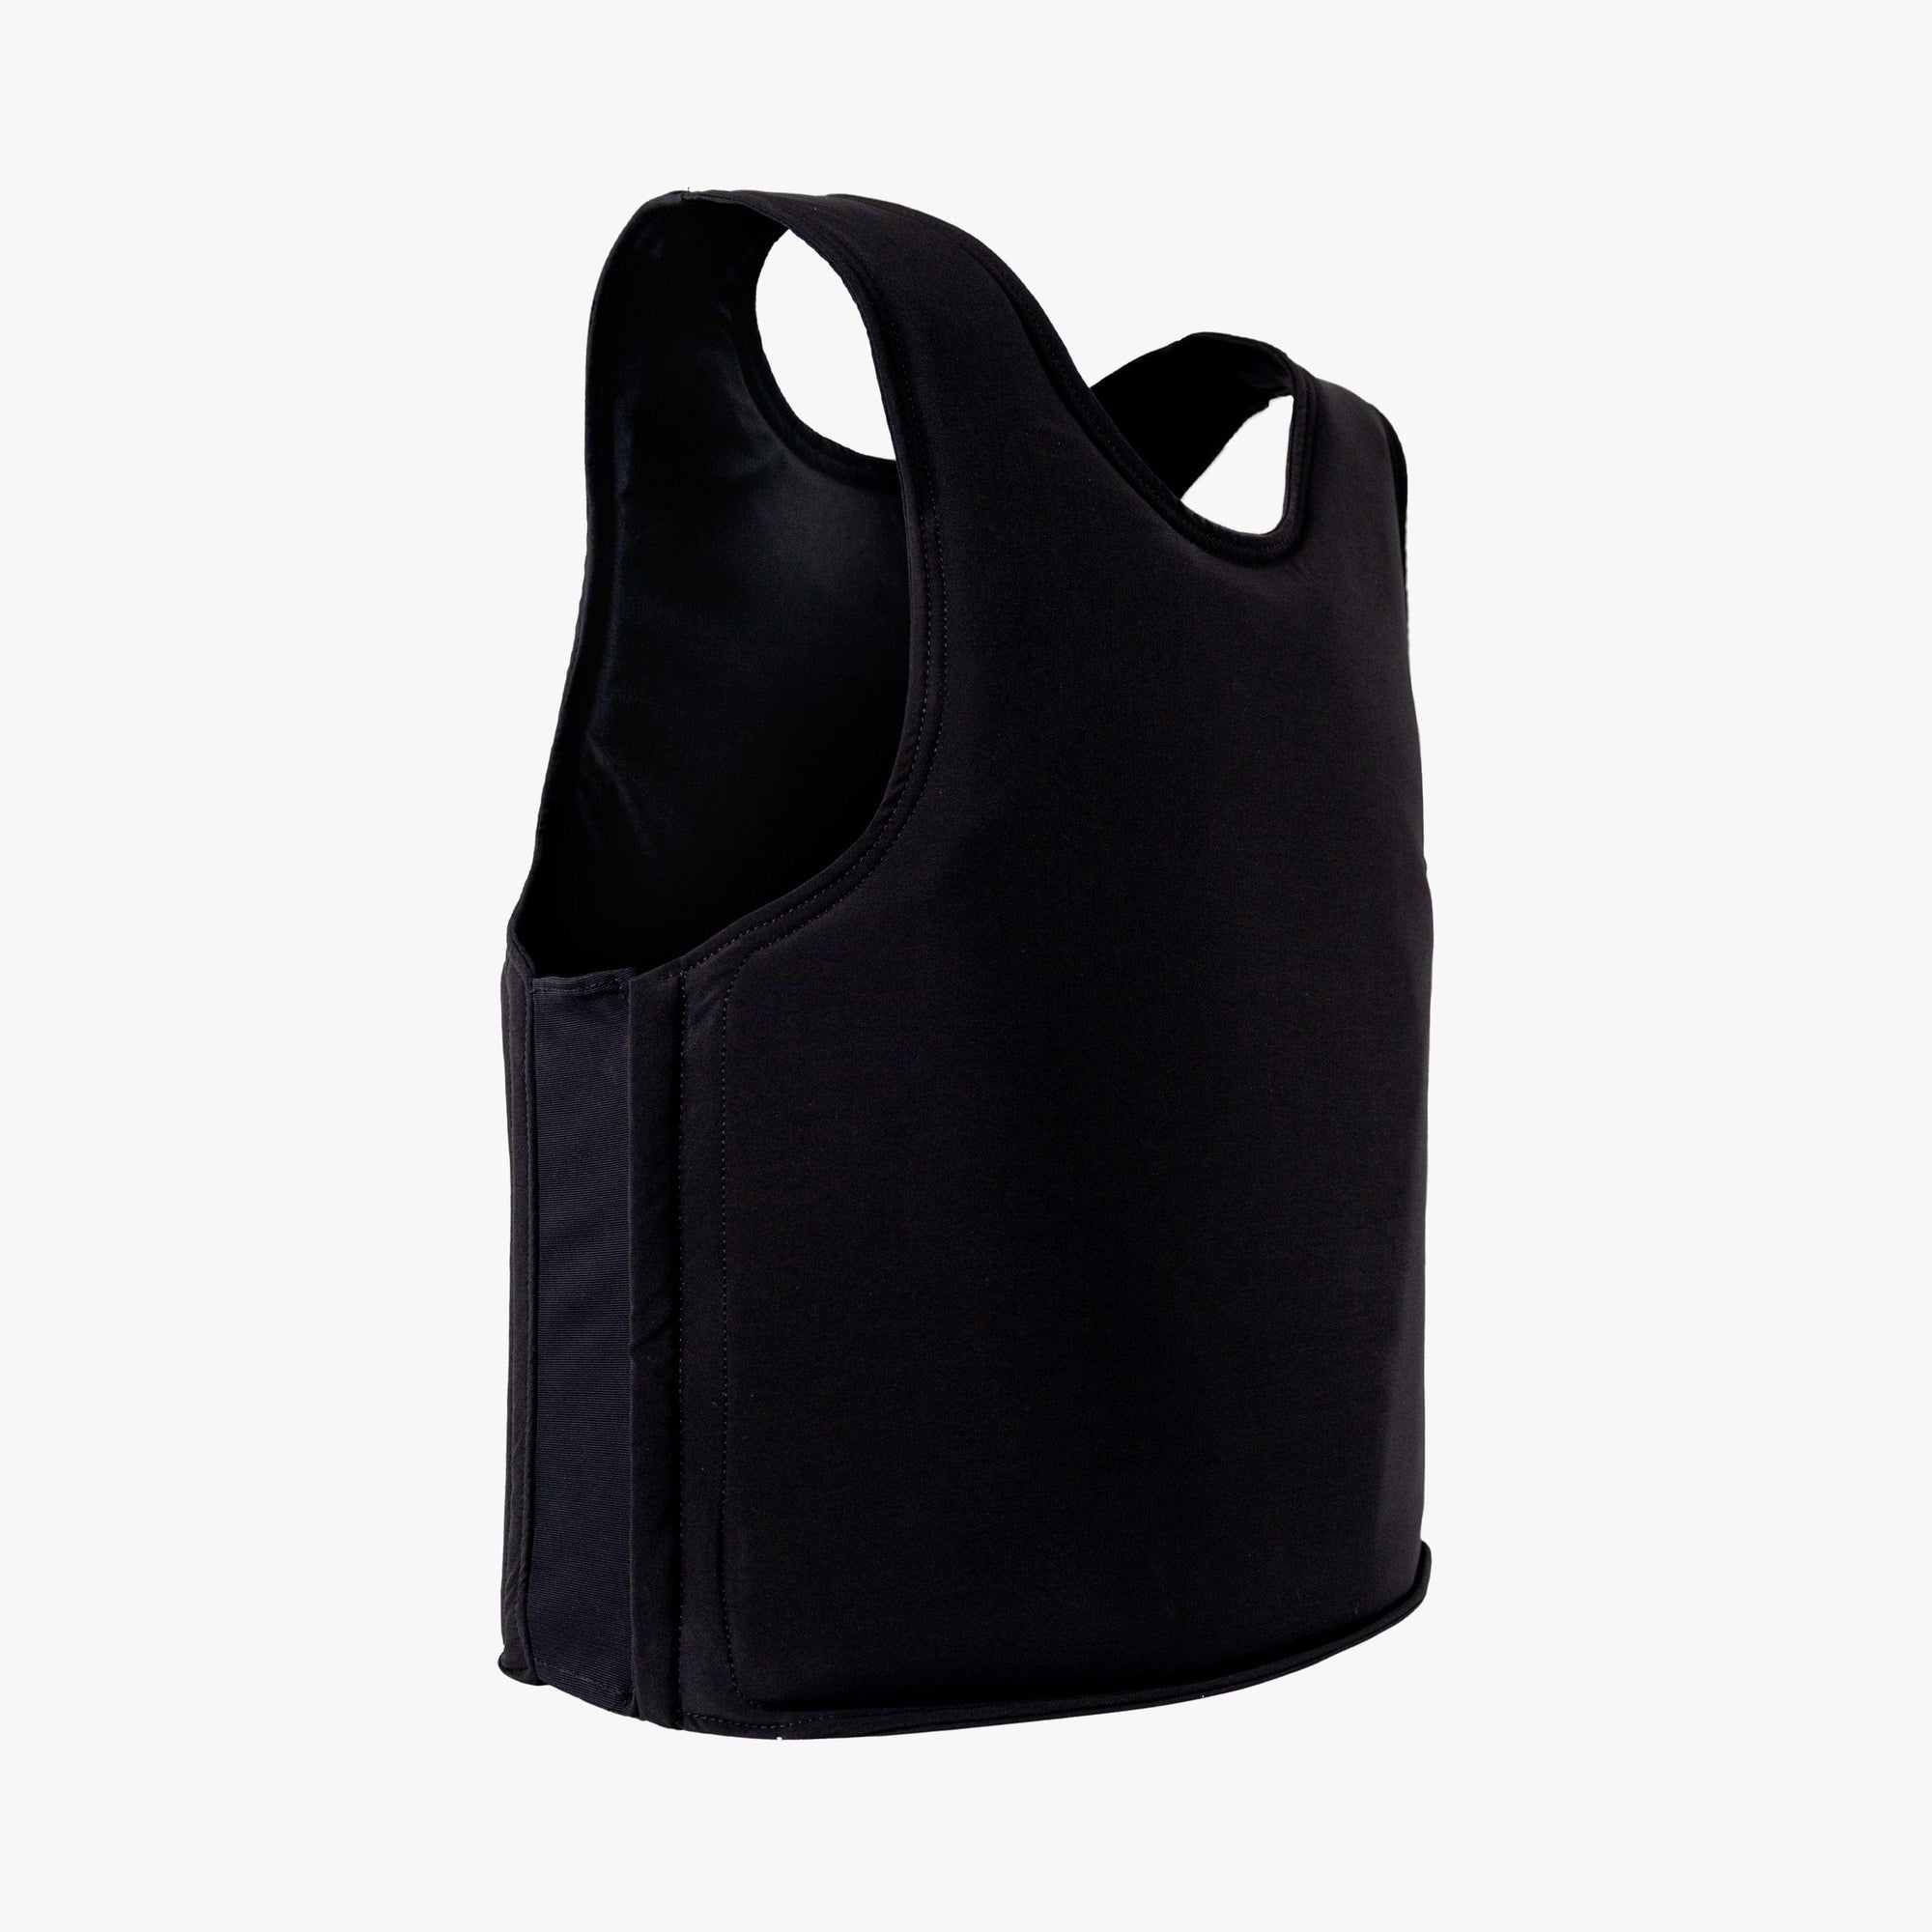 Image of our level 2 body armor vest in white. This ballistic vest is 1/3 lighter than any other bulletproof vest. 